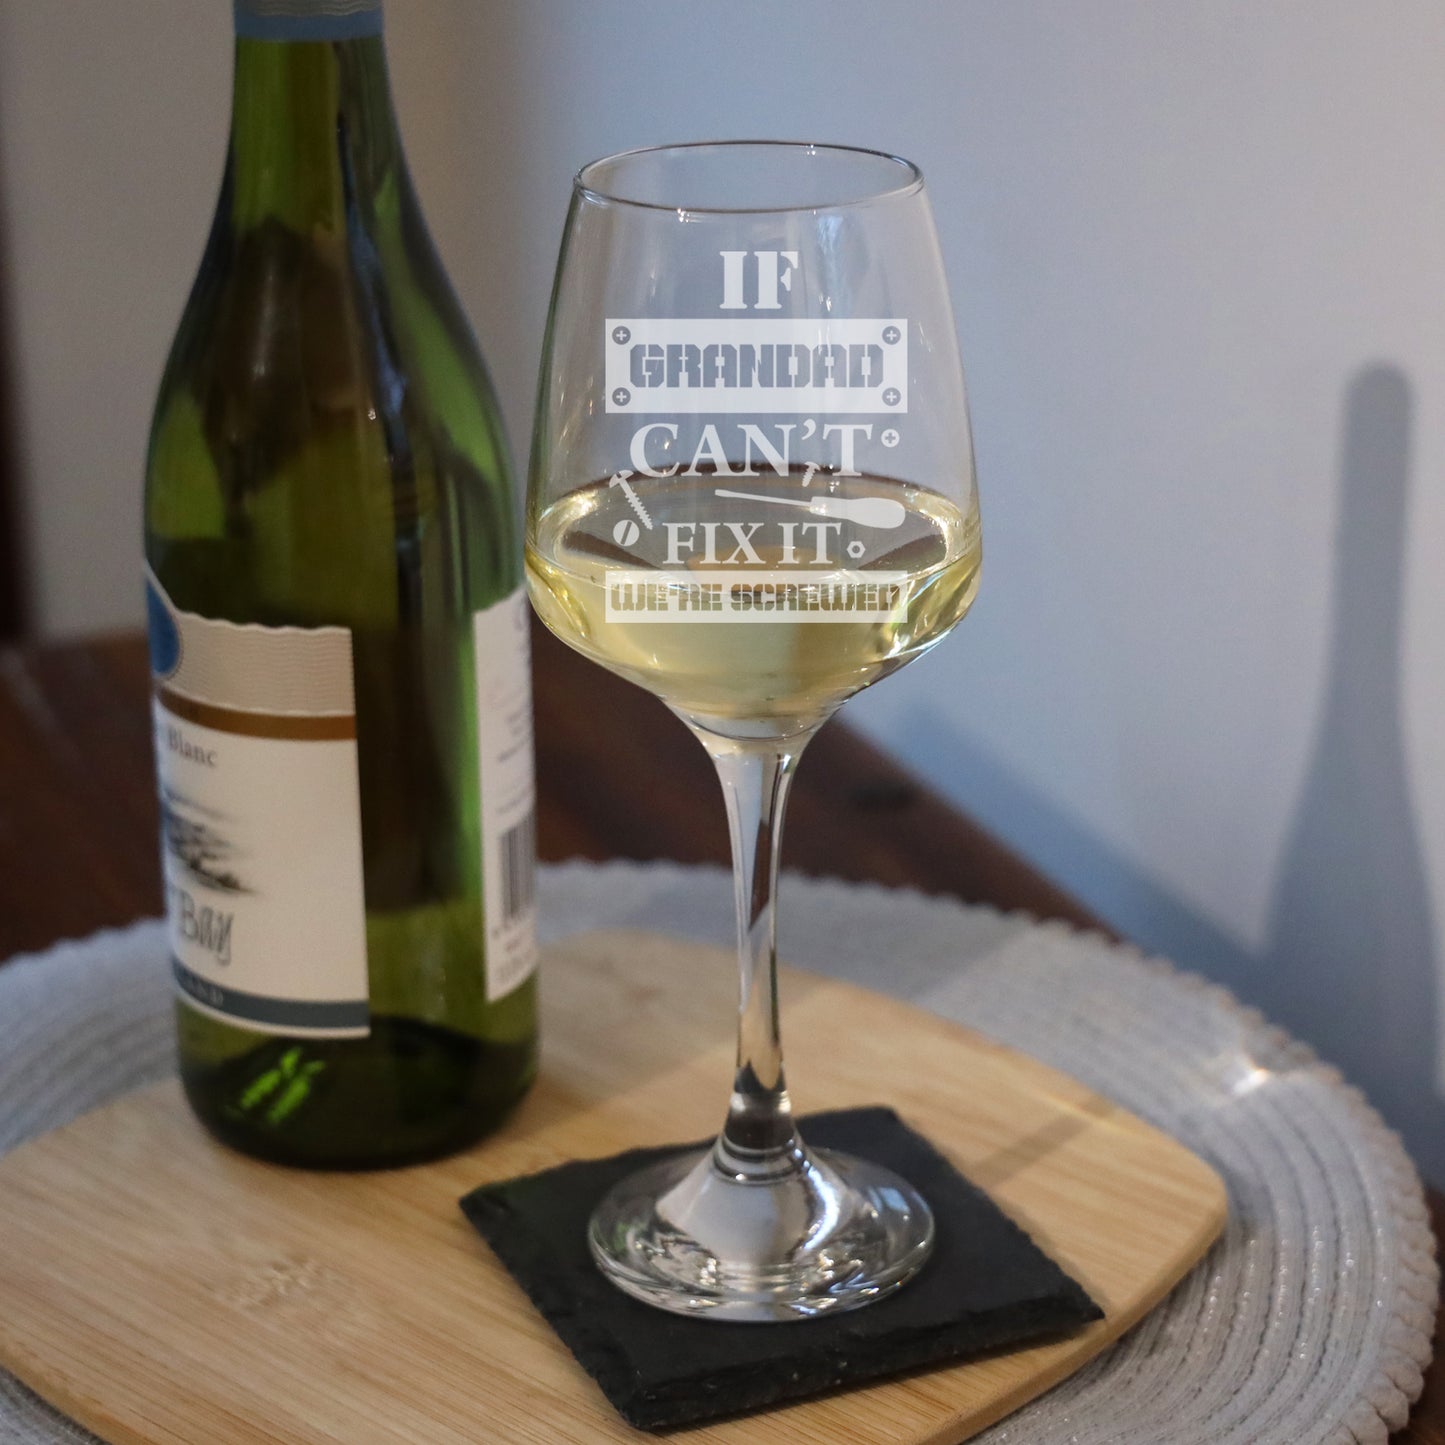 Engraved "If Grandad Can't Fix It We're Screwed " Novelty Wine Glass and/or Coaster Set  - Always Looking Good -   